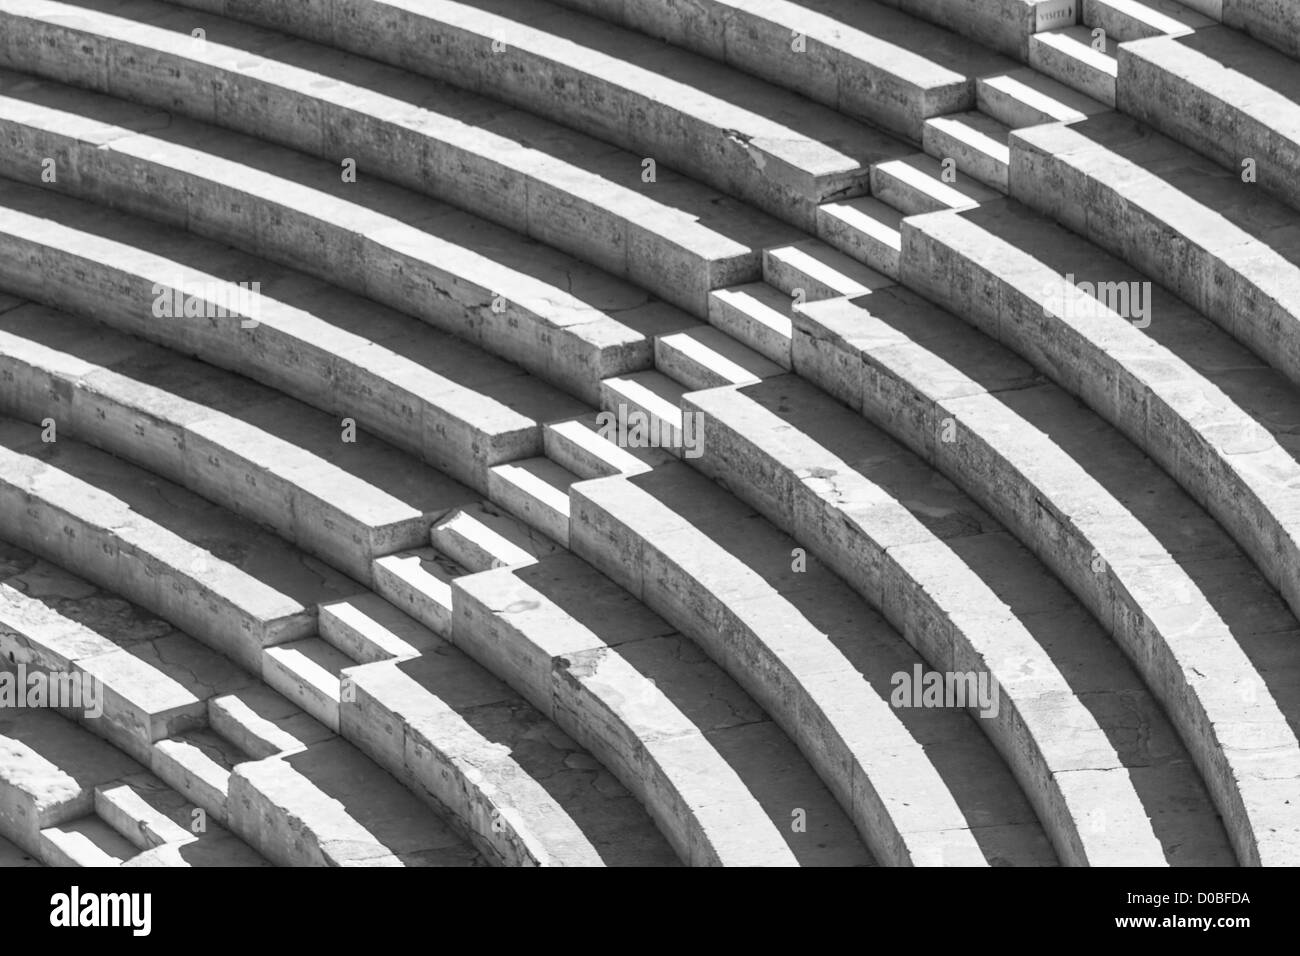 Stairs forming a high contrast black and white pattern Stock Photo